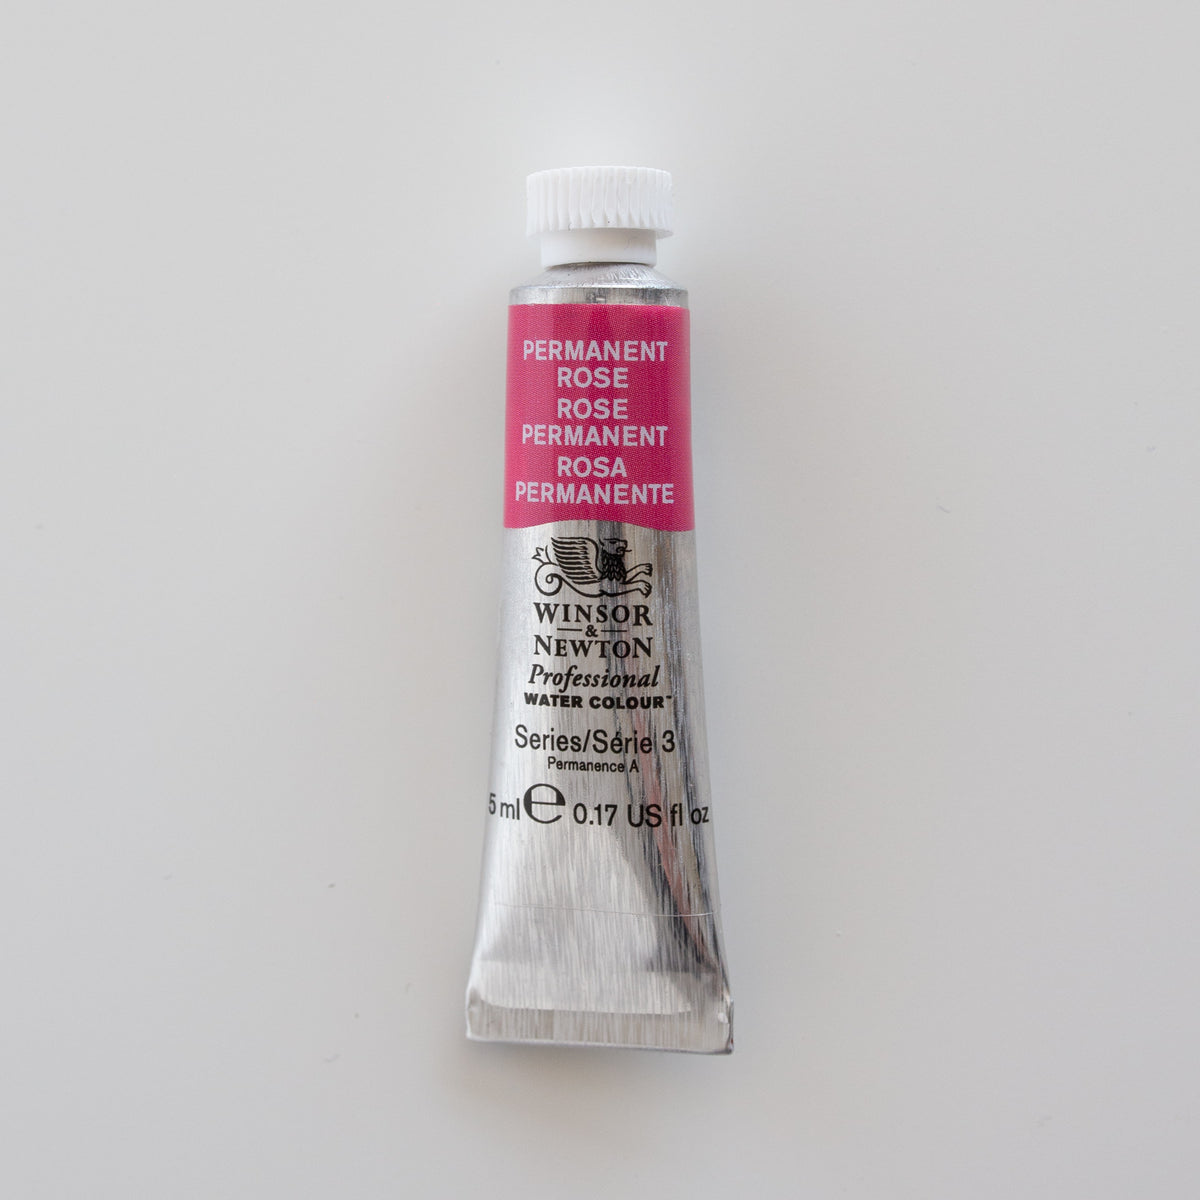 Winsor & Newton Professional Water Colours 5ml Permanent Rose 3